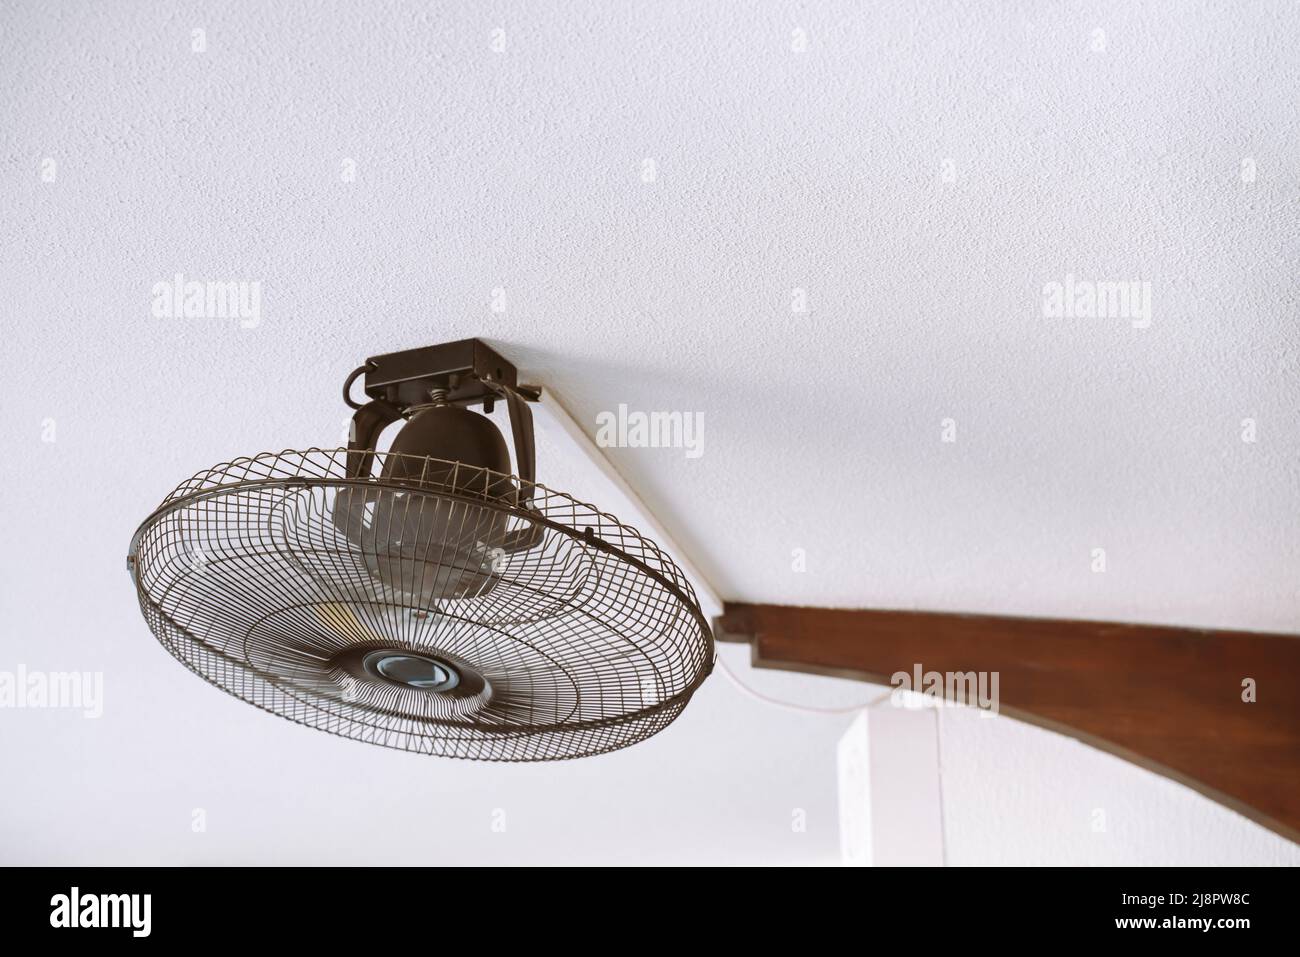 Fan with blades in a protective casing on the ceiling Stock Photo